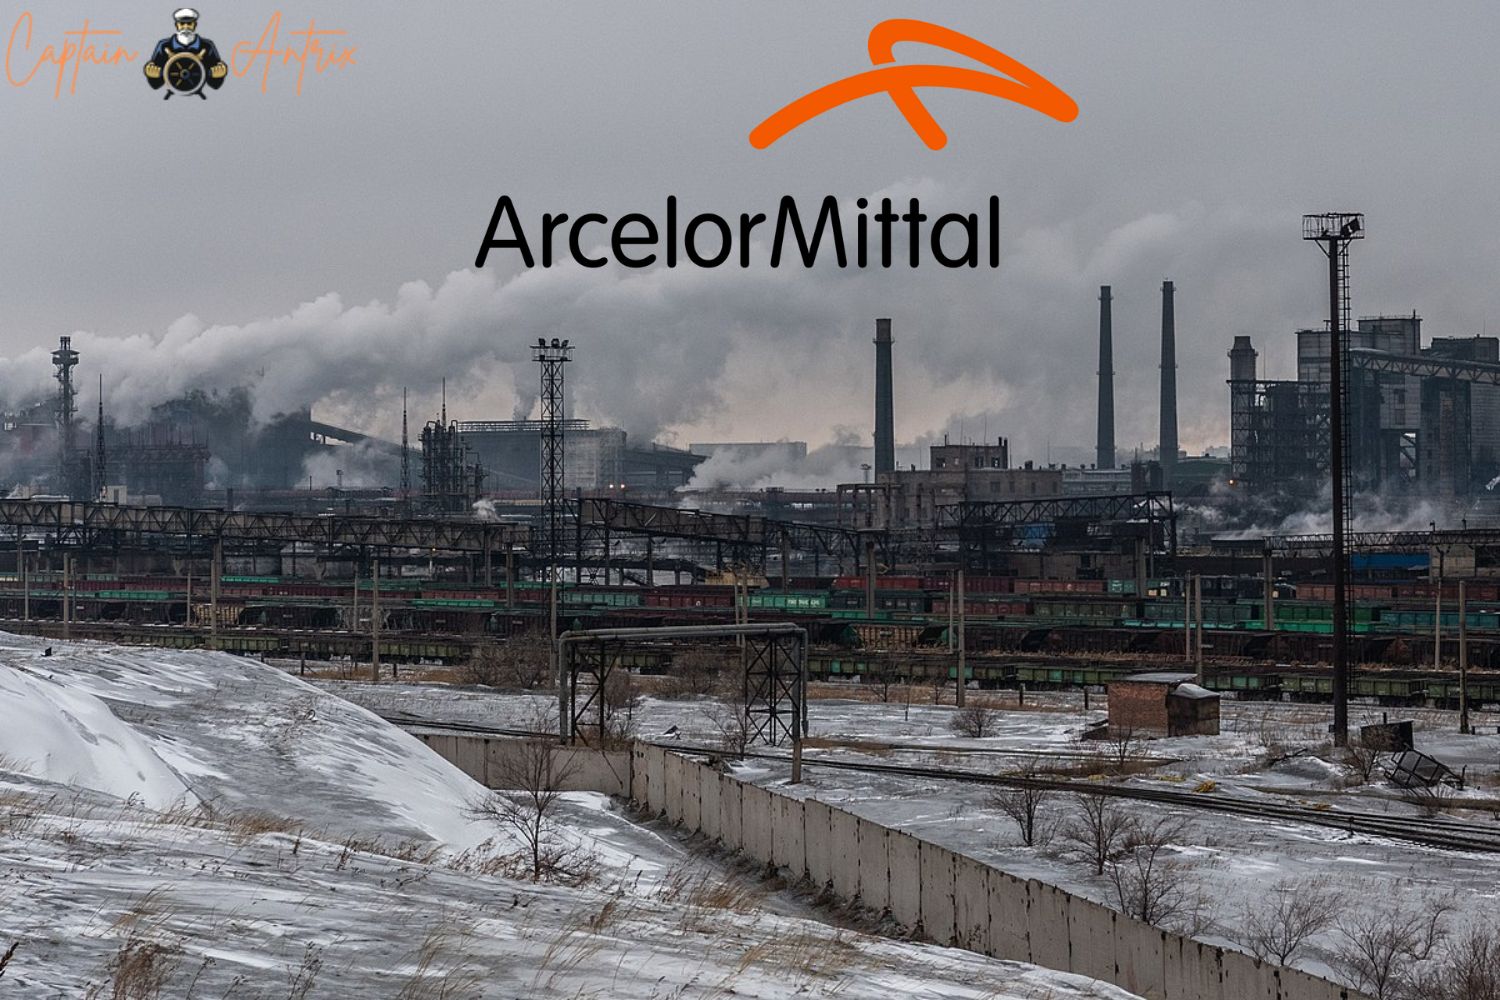 Tragedy at ArcelorMittal Temirtau: 21 Lives Lost in Kazakhstan Mine Fire